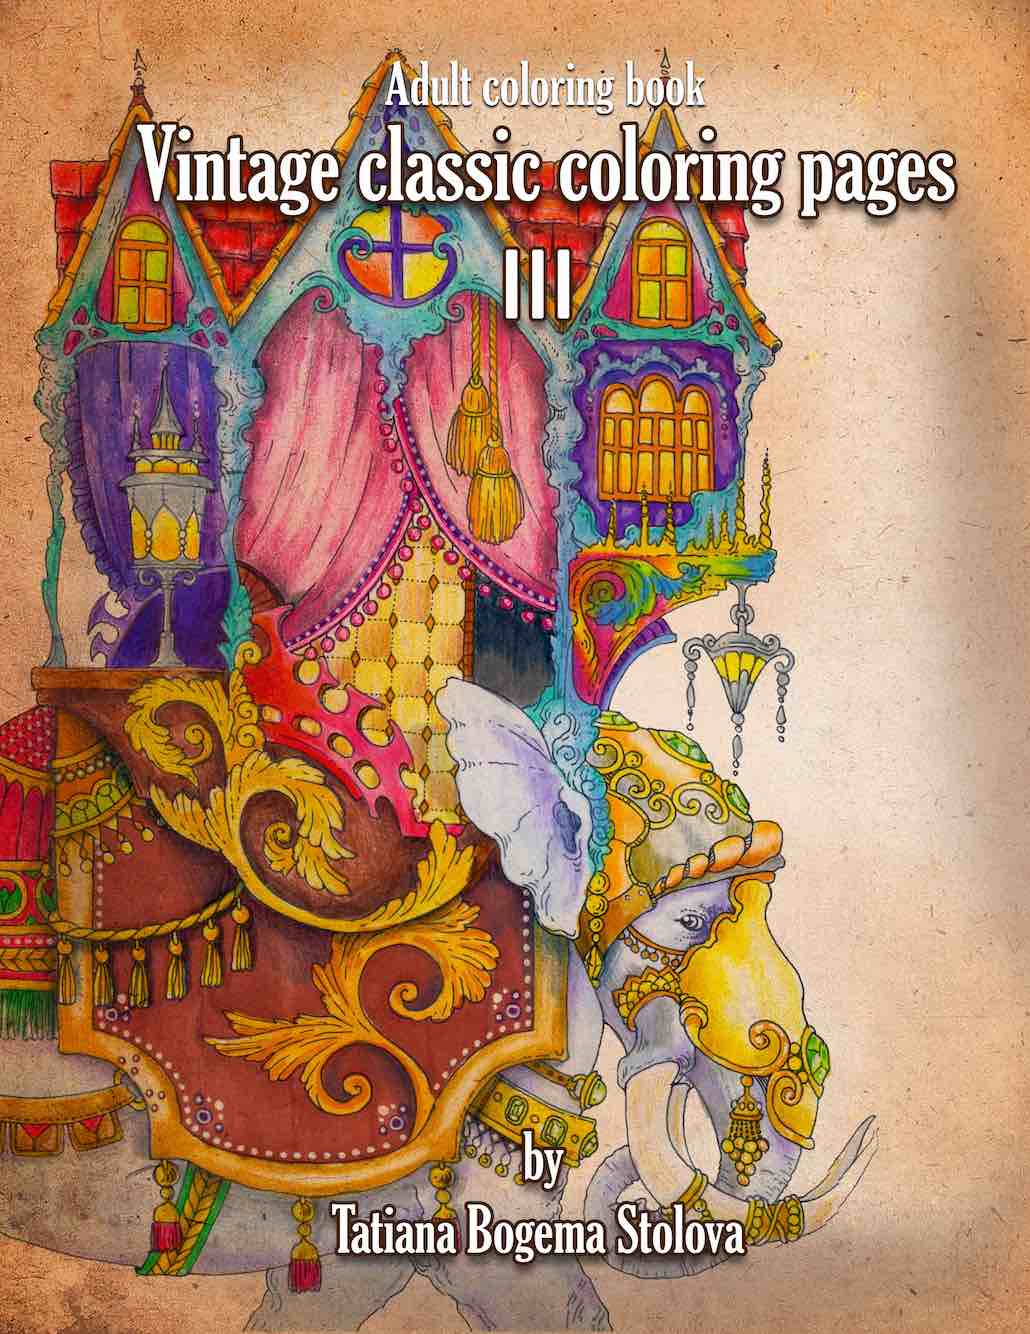 Vintage Classic Coloring Pages III